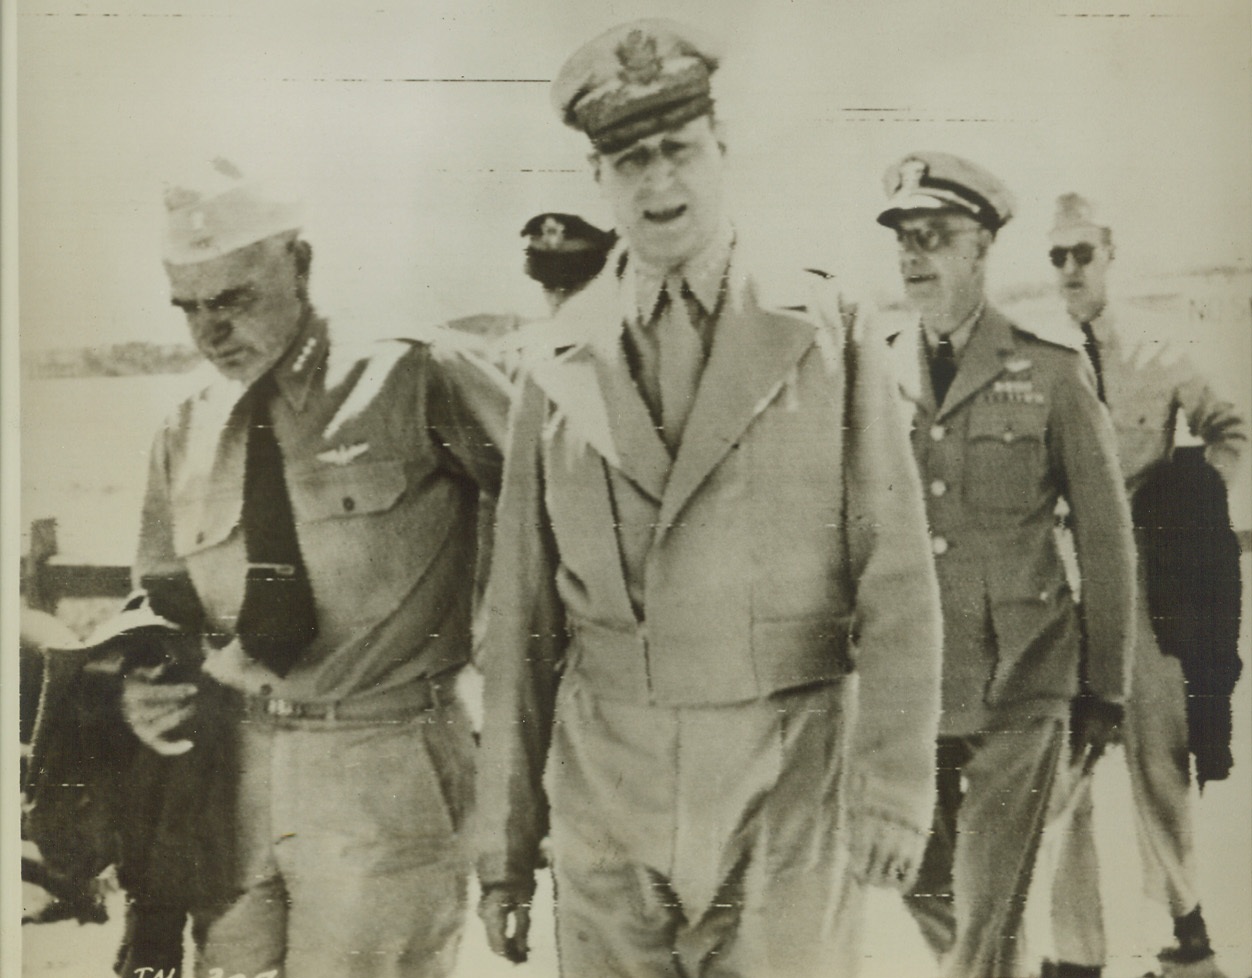 Plan More Jap Headaches, 11/3/1943. In this photo, flashed to the U.S. by radiotelephoto, Admiral William F. Halsey, Jr. (left), Commander of South Pacific Naval Forces, Gen. Douglas Macarthur, Allied Commander-in-Chief in the Southwest Pacific, and Vice Admiral A.S. Carpender, (right, behind Macarthur), Commander of Allied Naval Forces in the Southwest Pacific, are shown “somewhere in Australia,” just after Admiral Halsey’s arrival to confer on plans for the American offensive against the Japs at Bouganville. Credit: U.S. Navy photo via Army radio.;